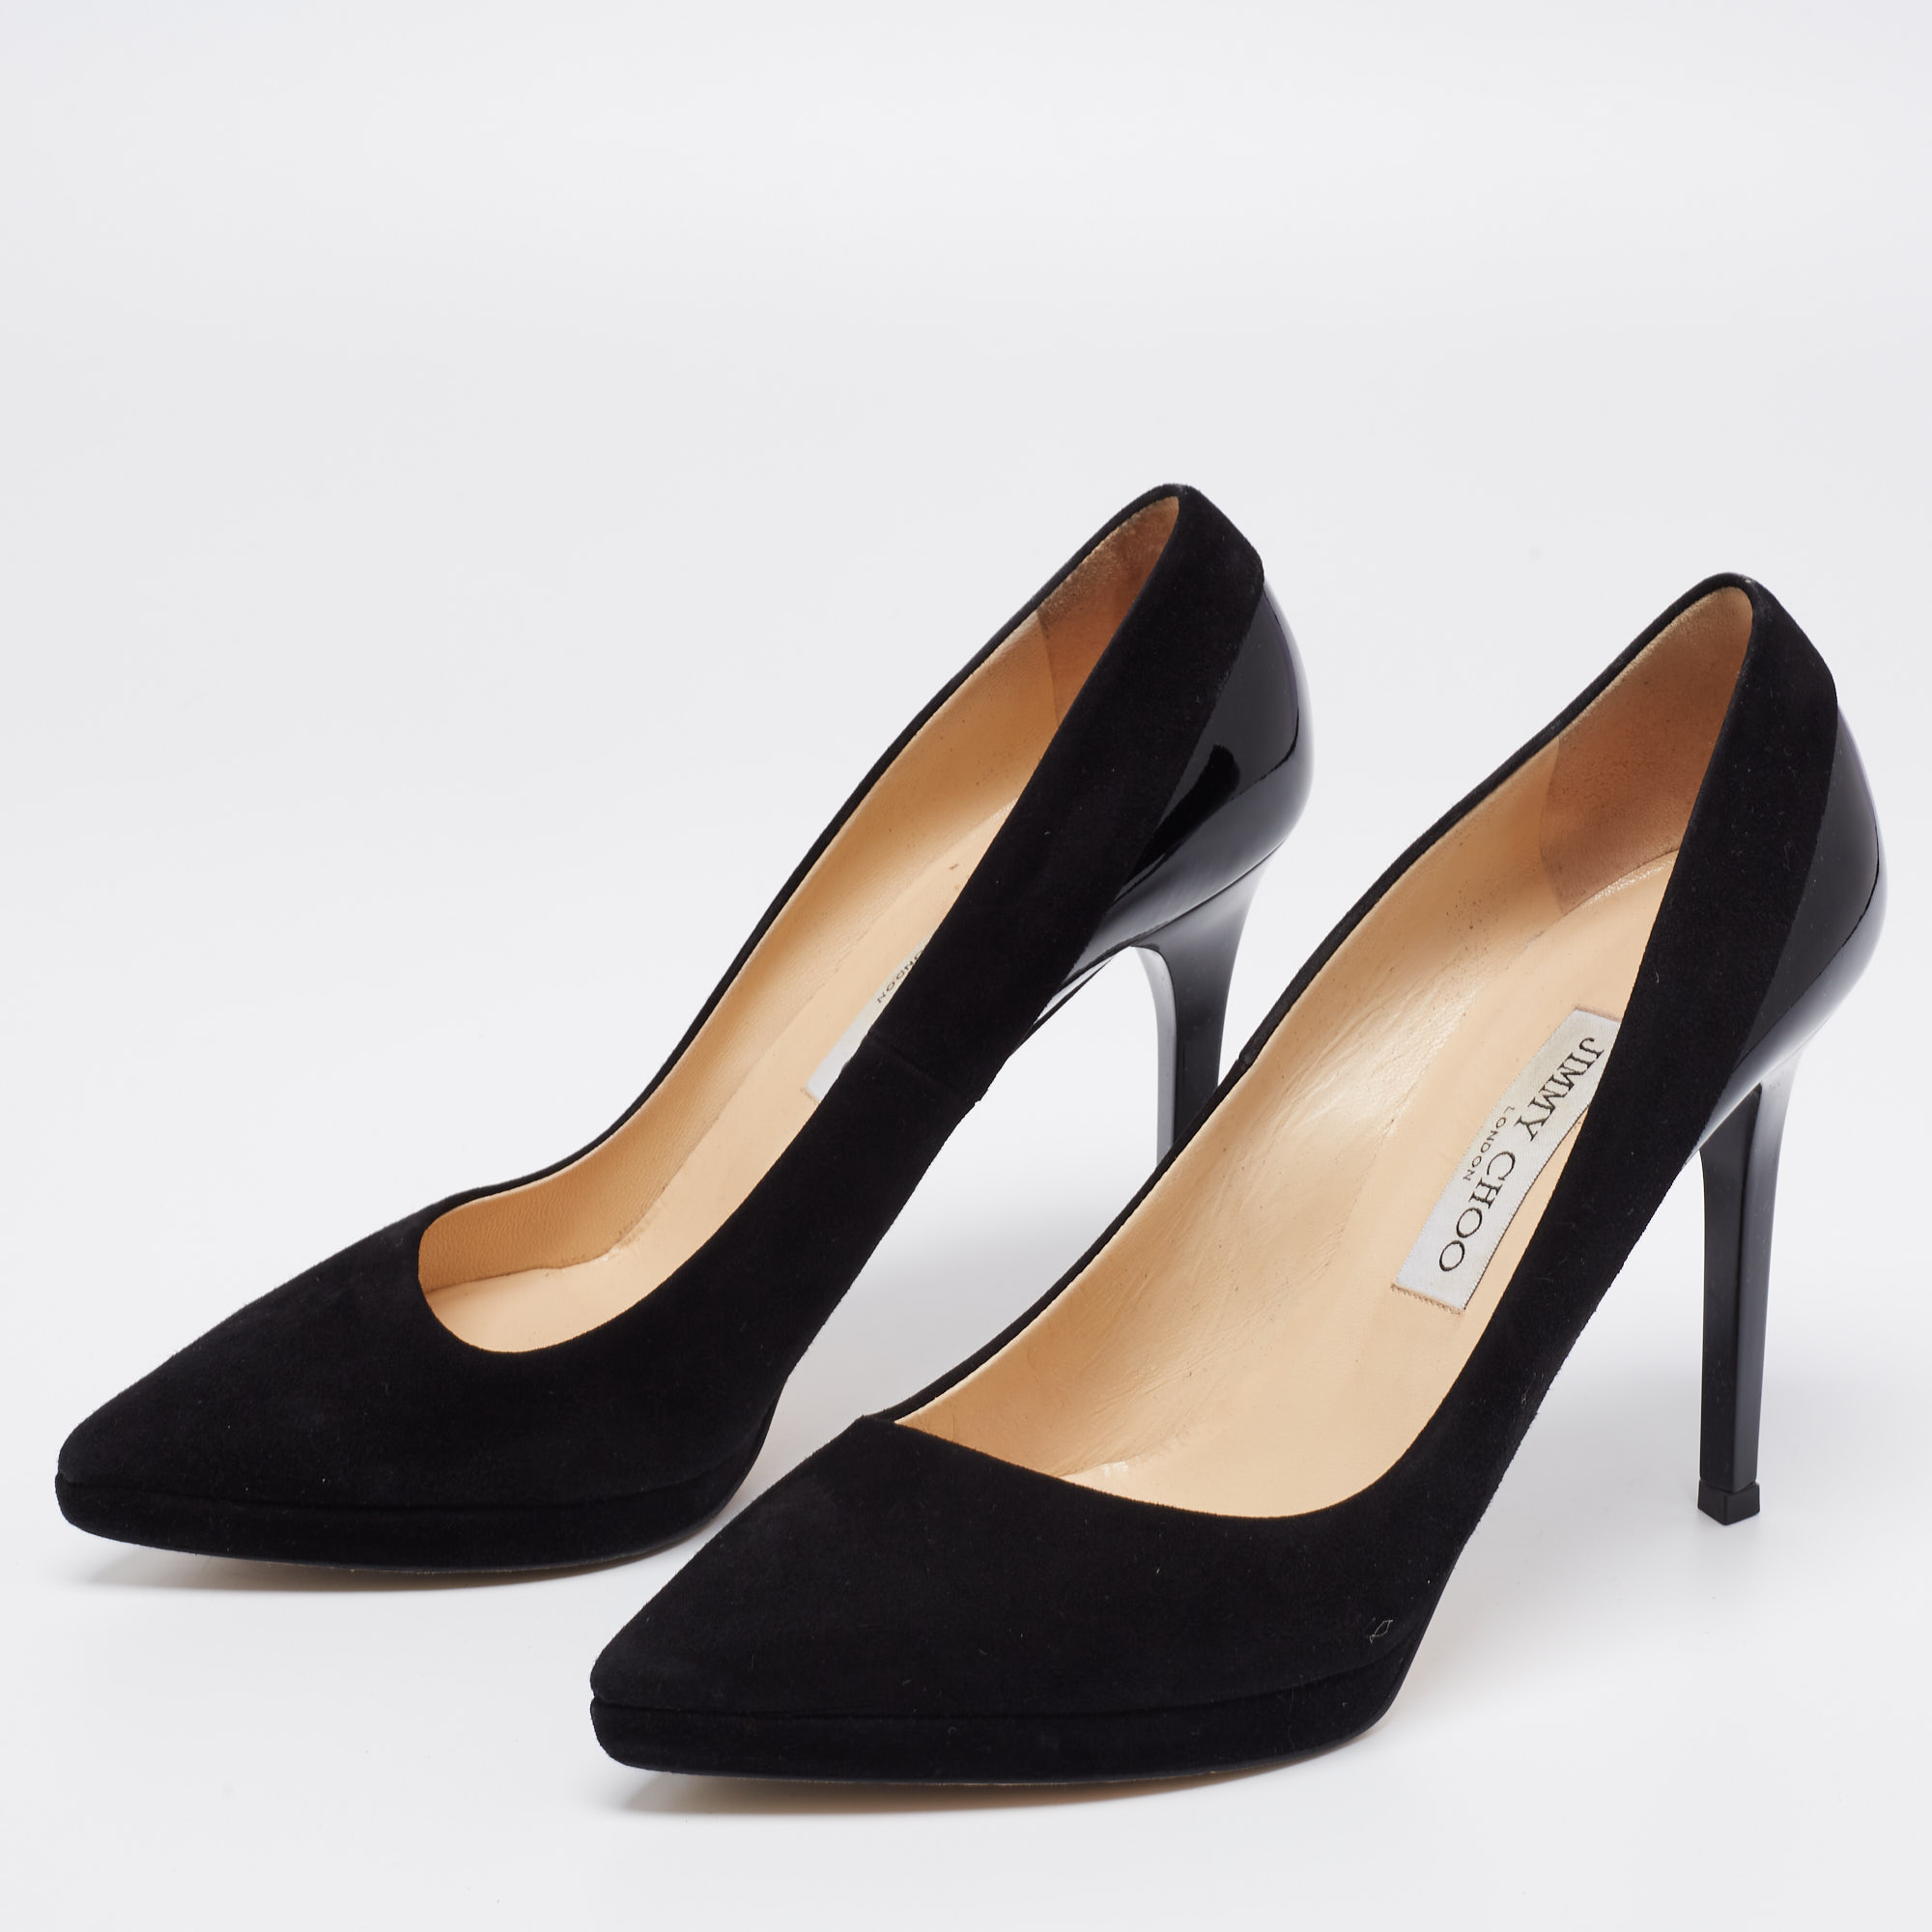 

Jimmy Choo Black Suede and Patent Leather Pointed Toe Pumps Size